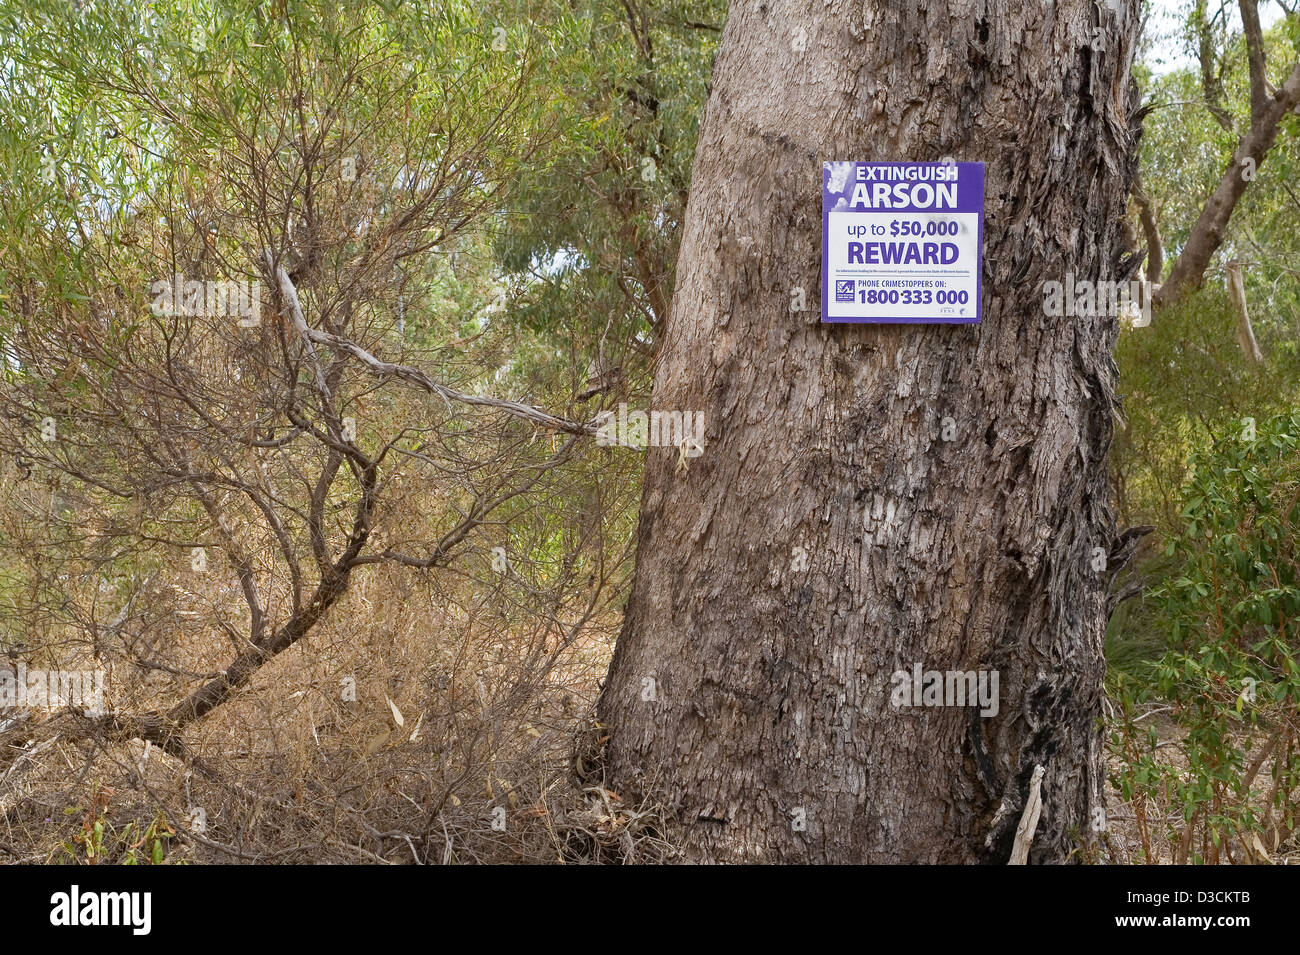 Reward for information about arsonists nailed to a tree in the Australian bush Stock Photo